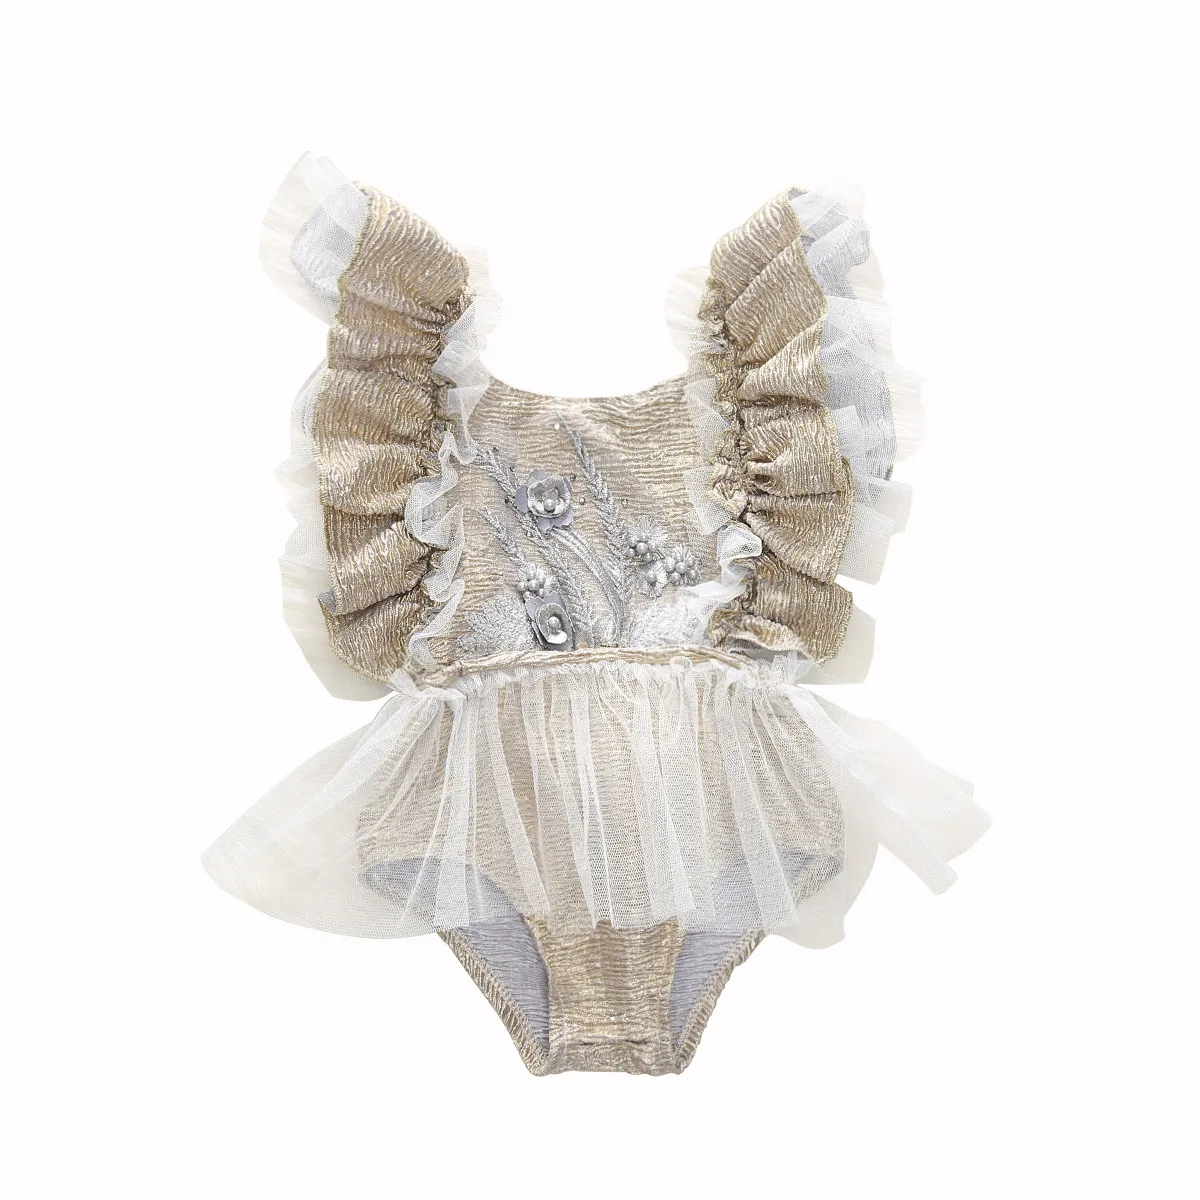 Boutique Girl Lace Princess Romper Summer Infant Flower Embroidery Fly Sleeve Tulle Infant Jumpsuit Sweet Newborn Gauze Onesie S278